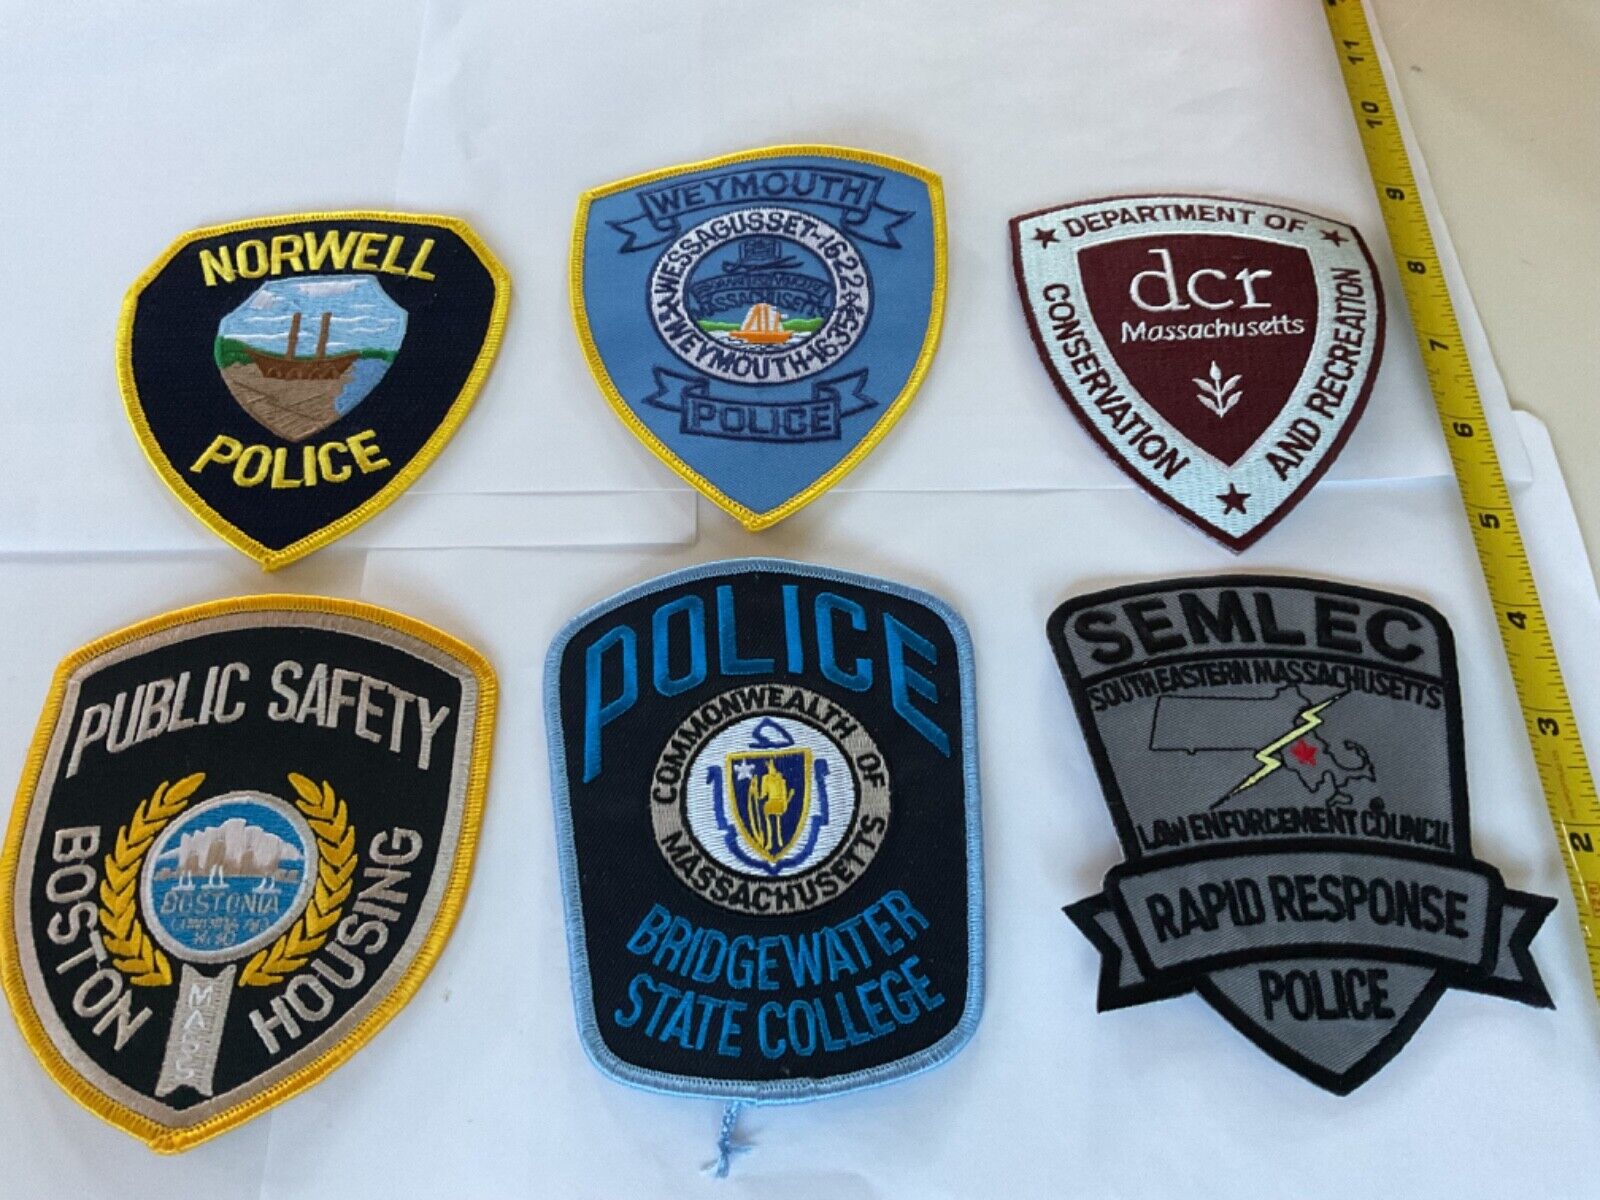 Police LawEnforcement collectors embroidered patch set 6 pieces